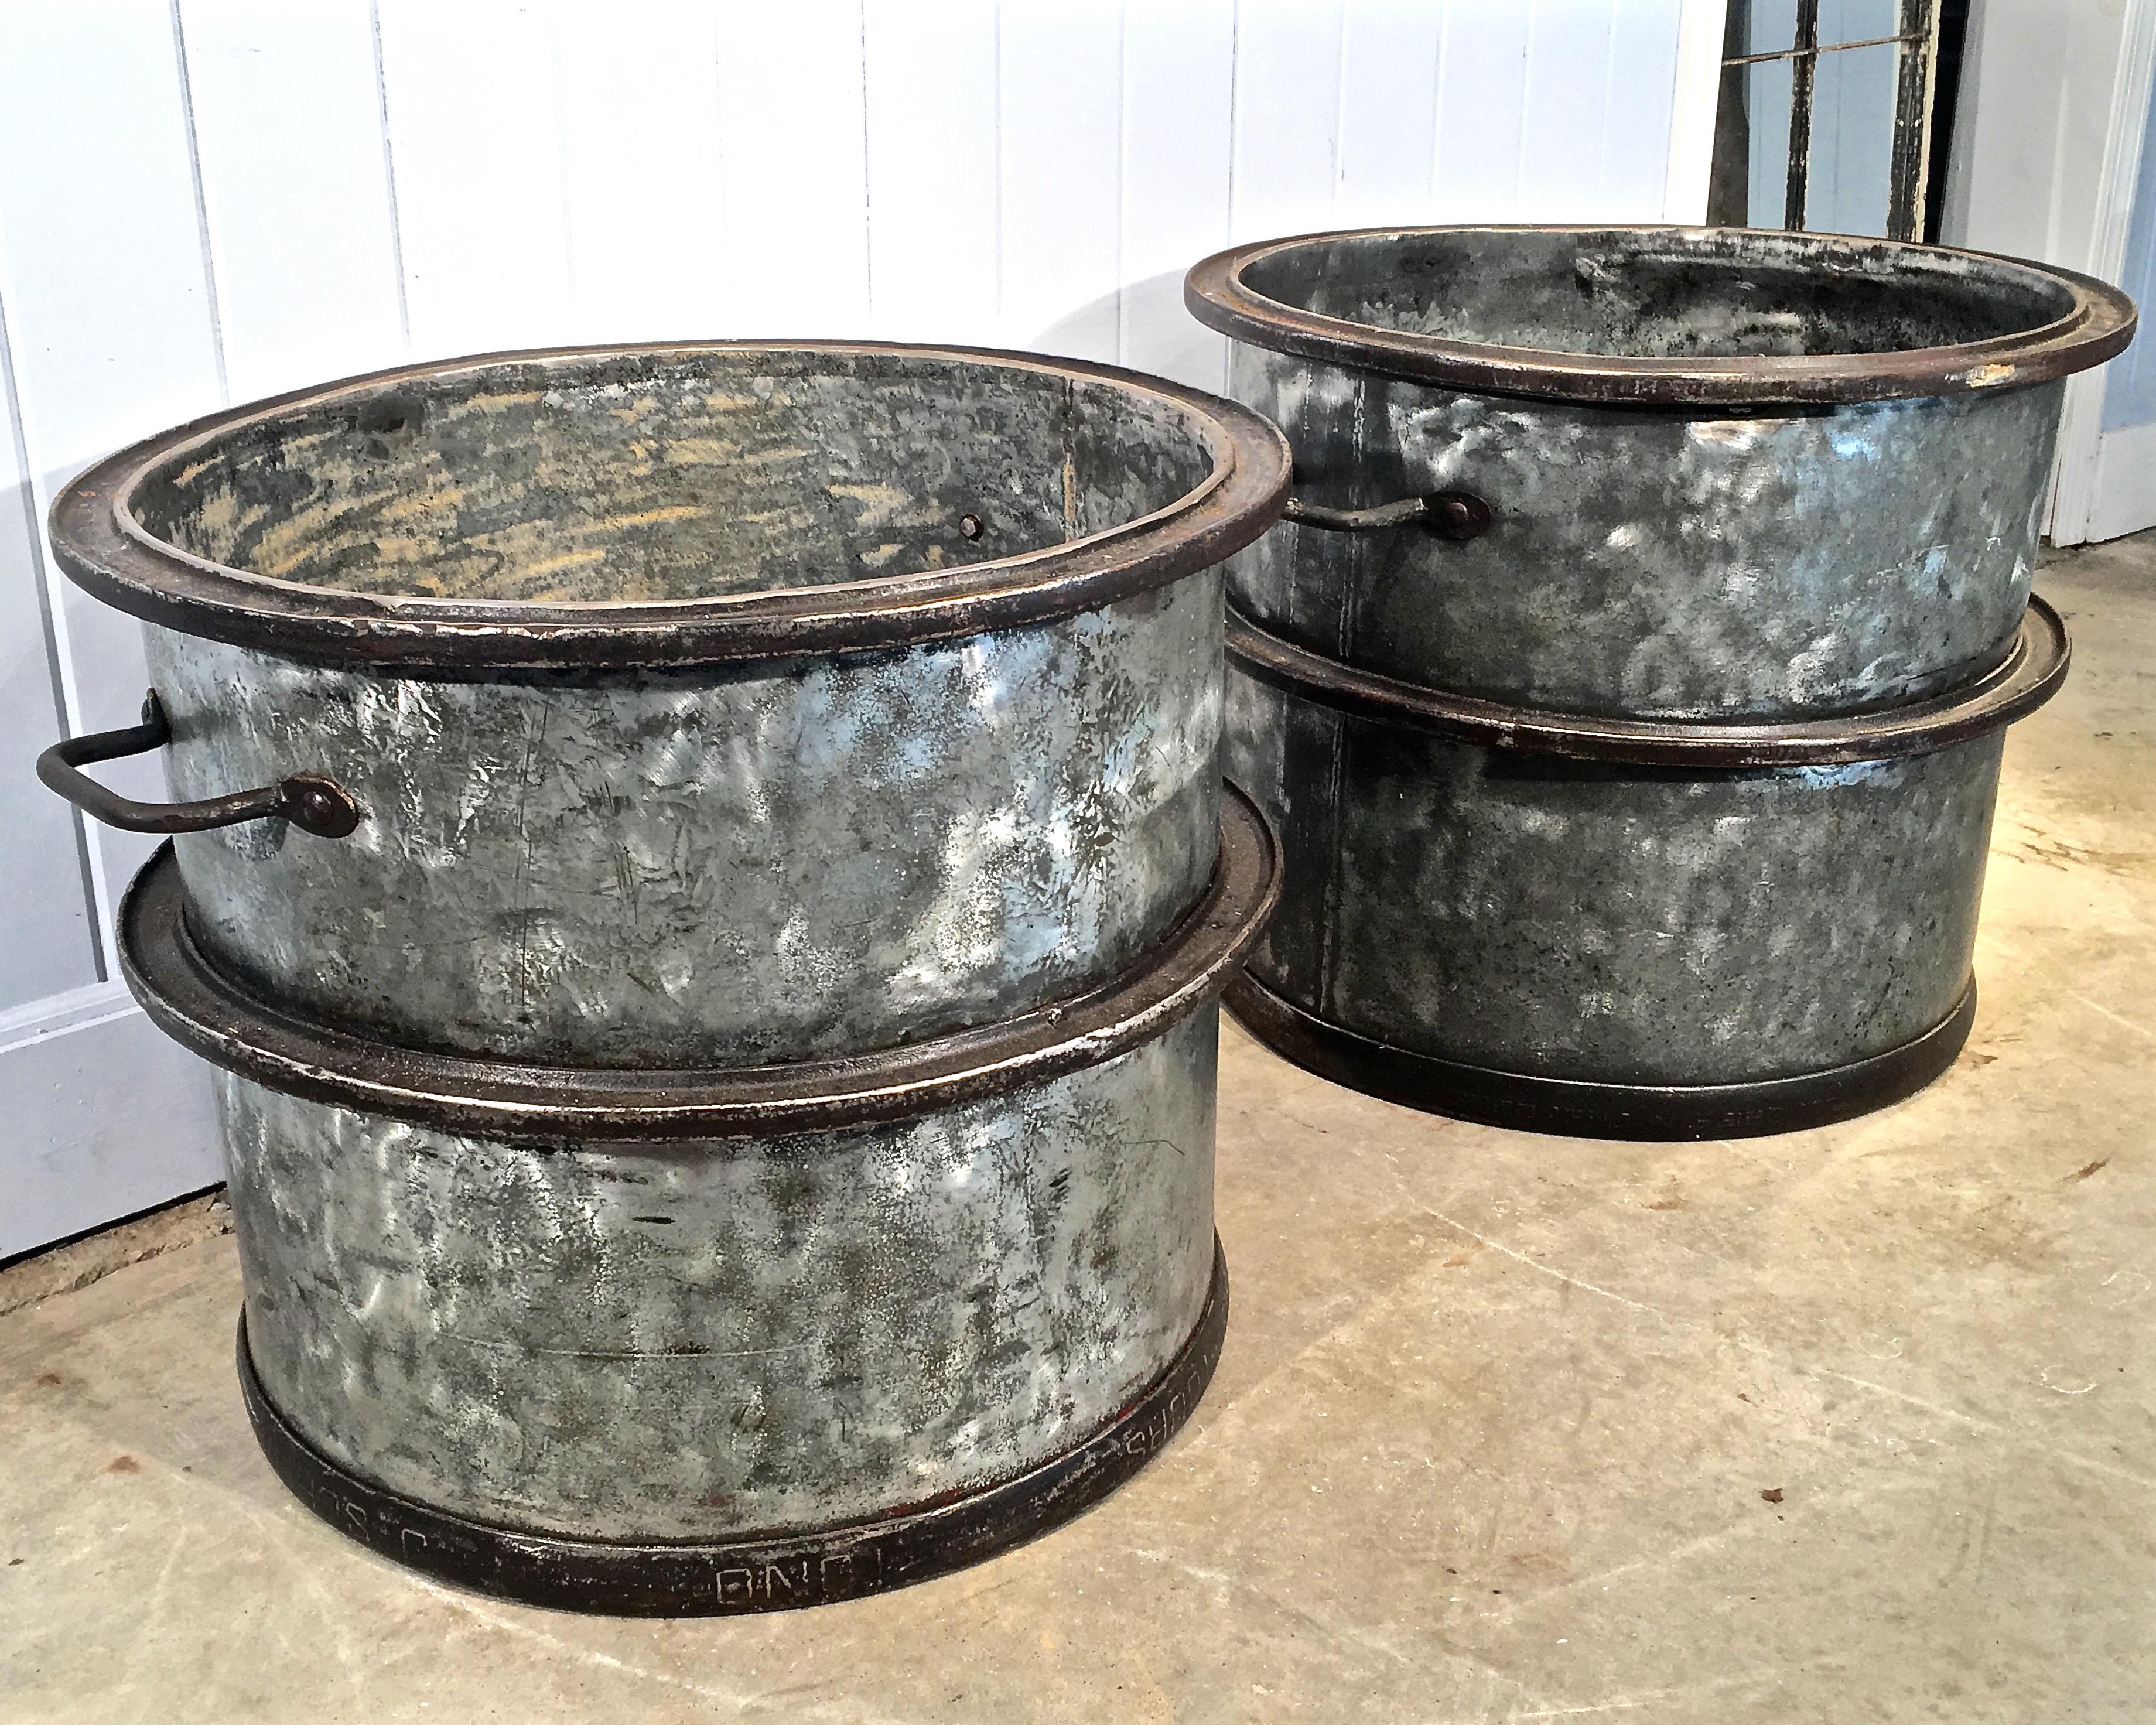 Pair of Large Heavy French Polished Galvanized Steel Tub Planters 2